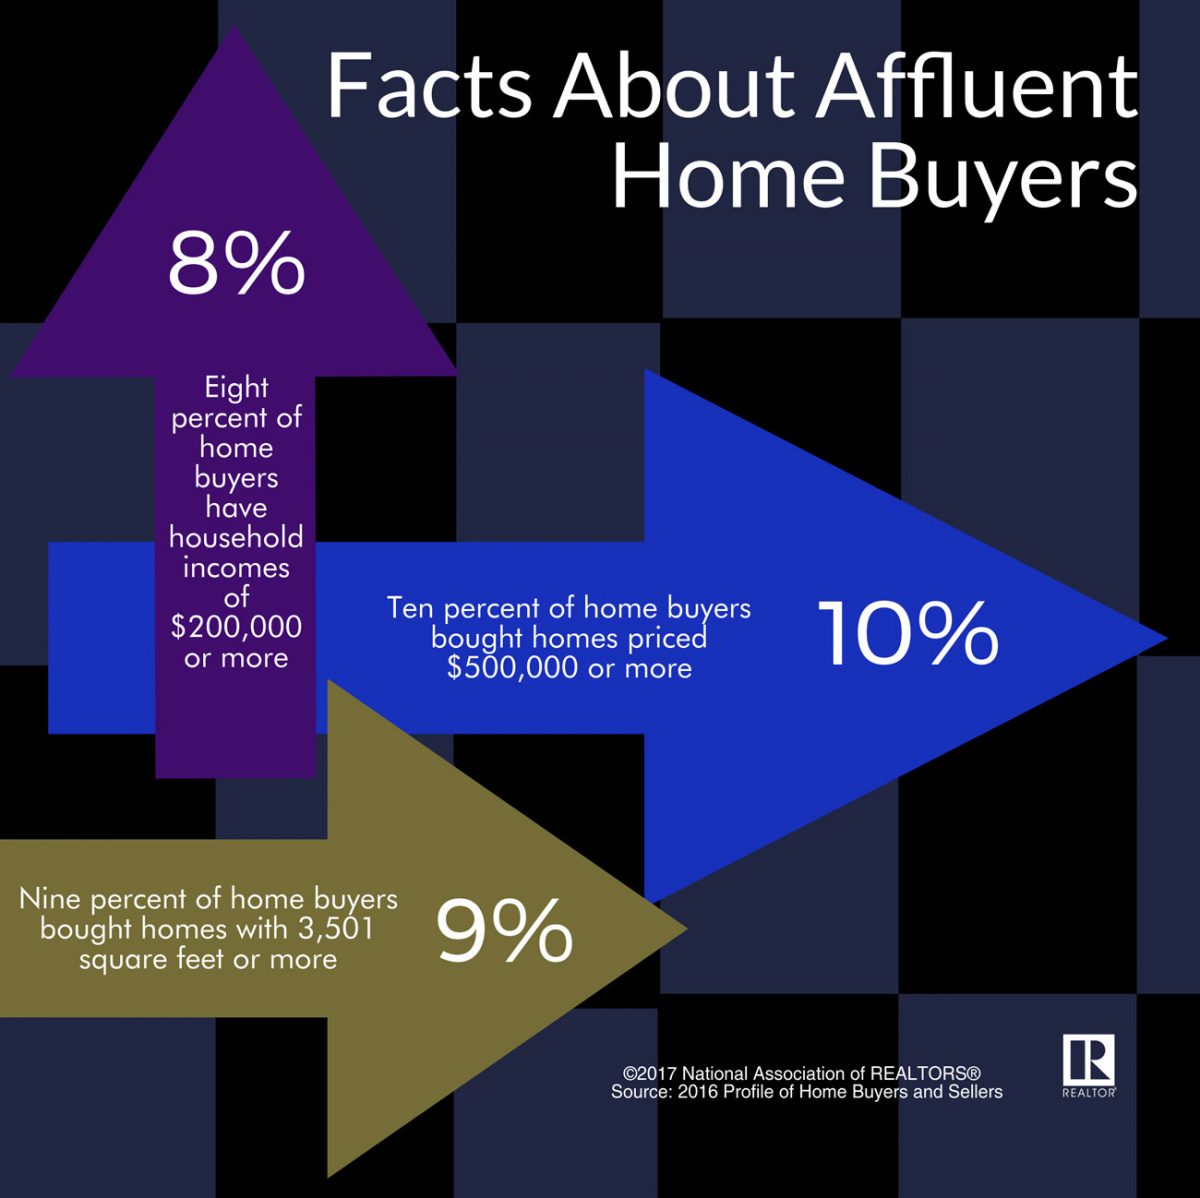 Facts About Affluent Home Buyers